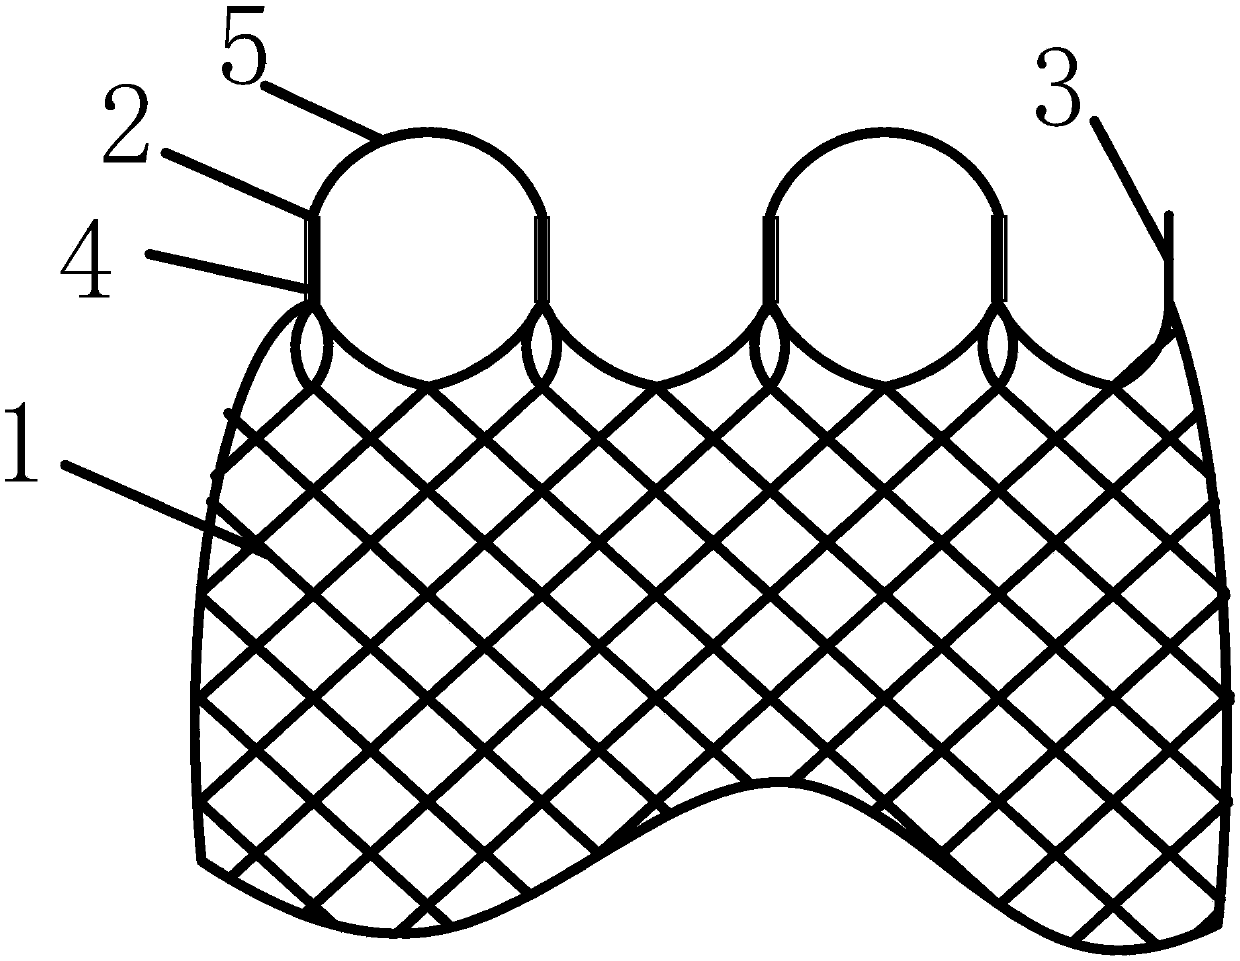 Tract stent with end protection